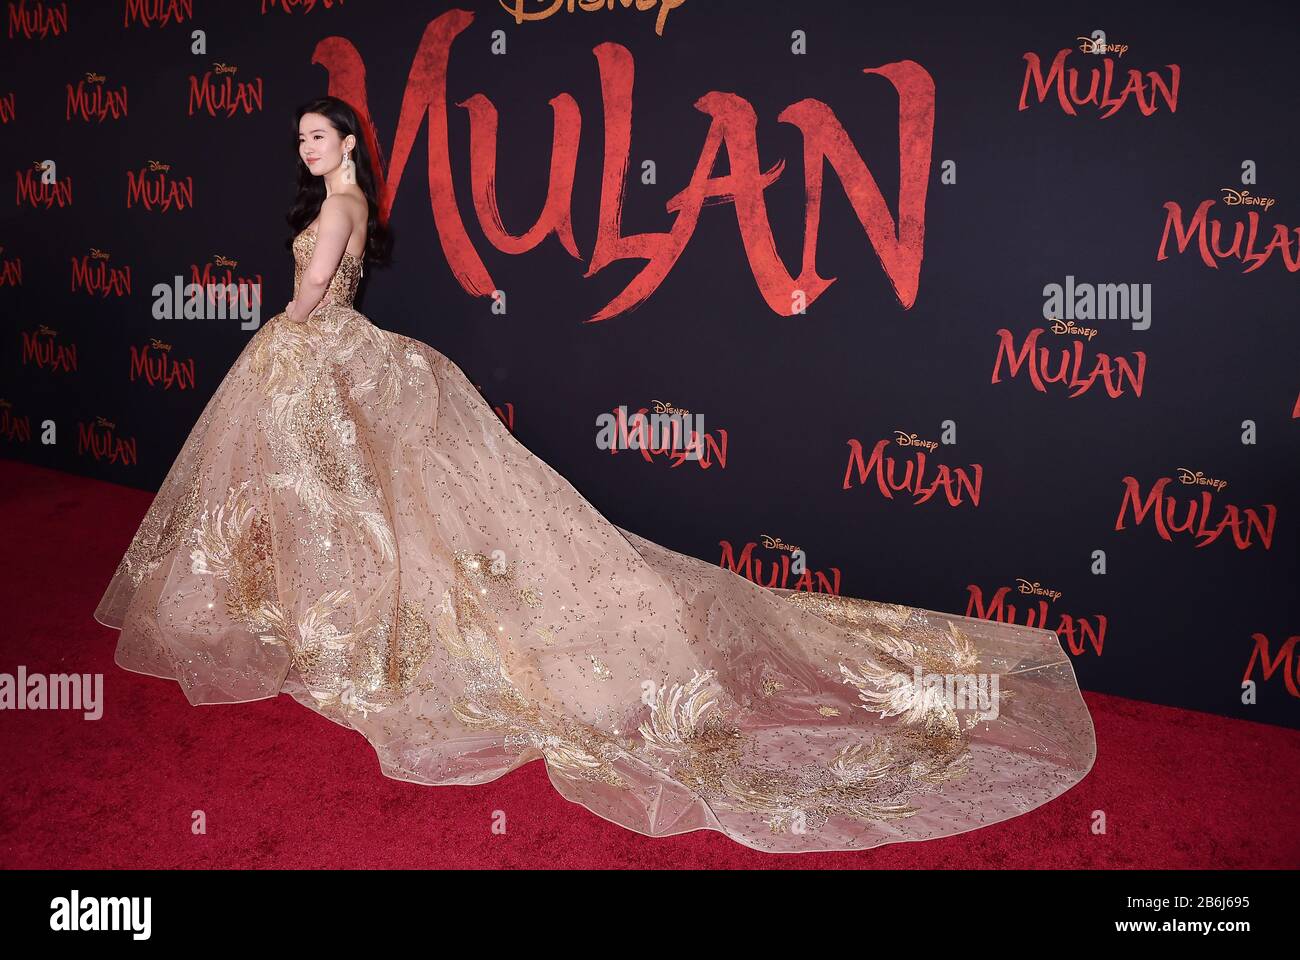 HOLLYWOOD, CA - MARCH 09: Yifei Liu attends the premiere of Disney's 'Mulan' at the El Capitan Theatre on March 09, 2020 in Hollywood, California. Stock Photo